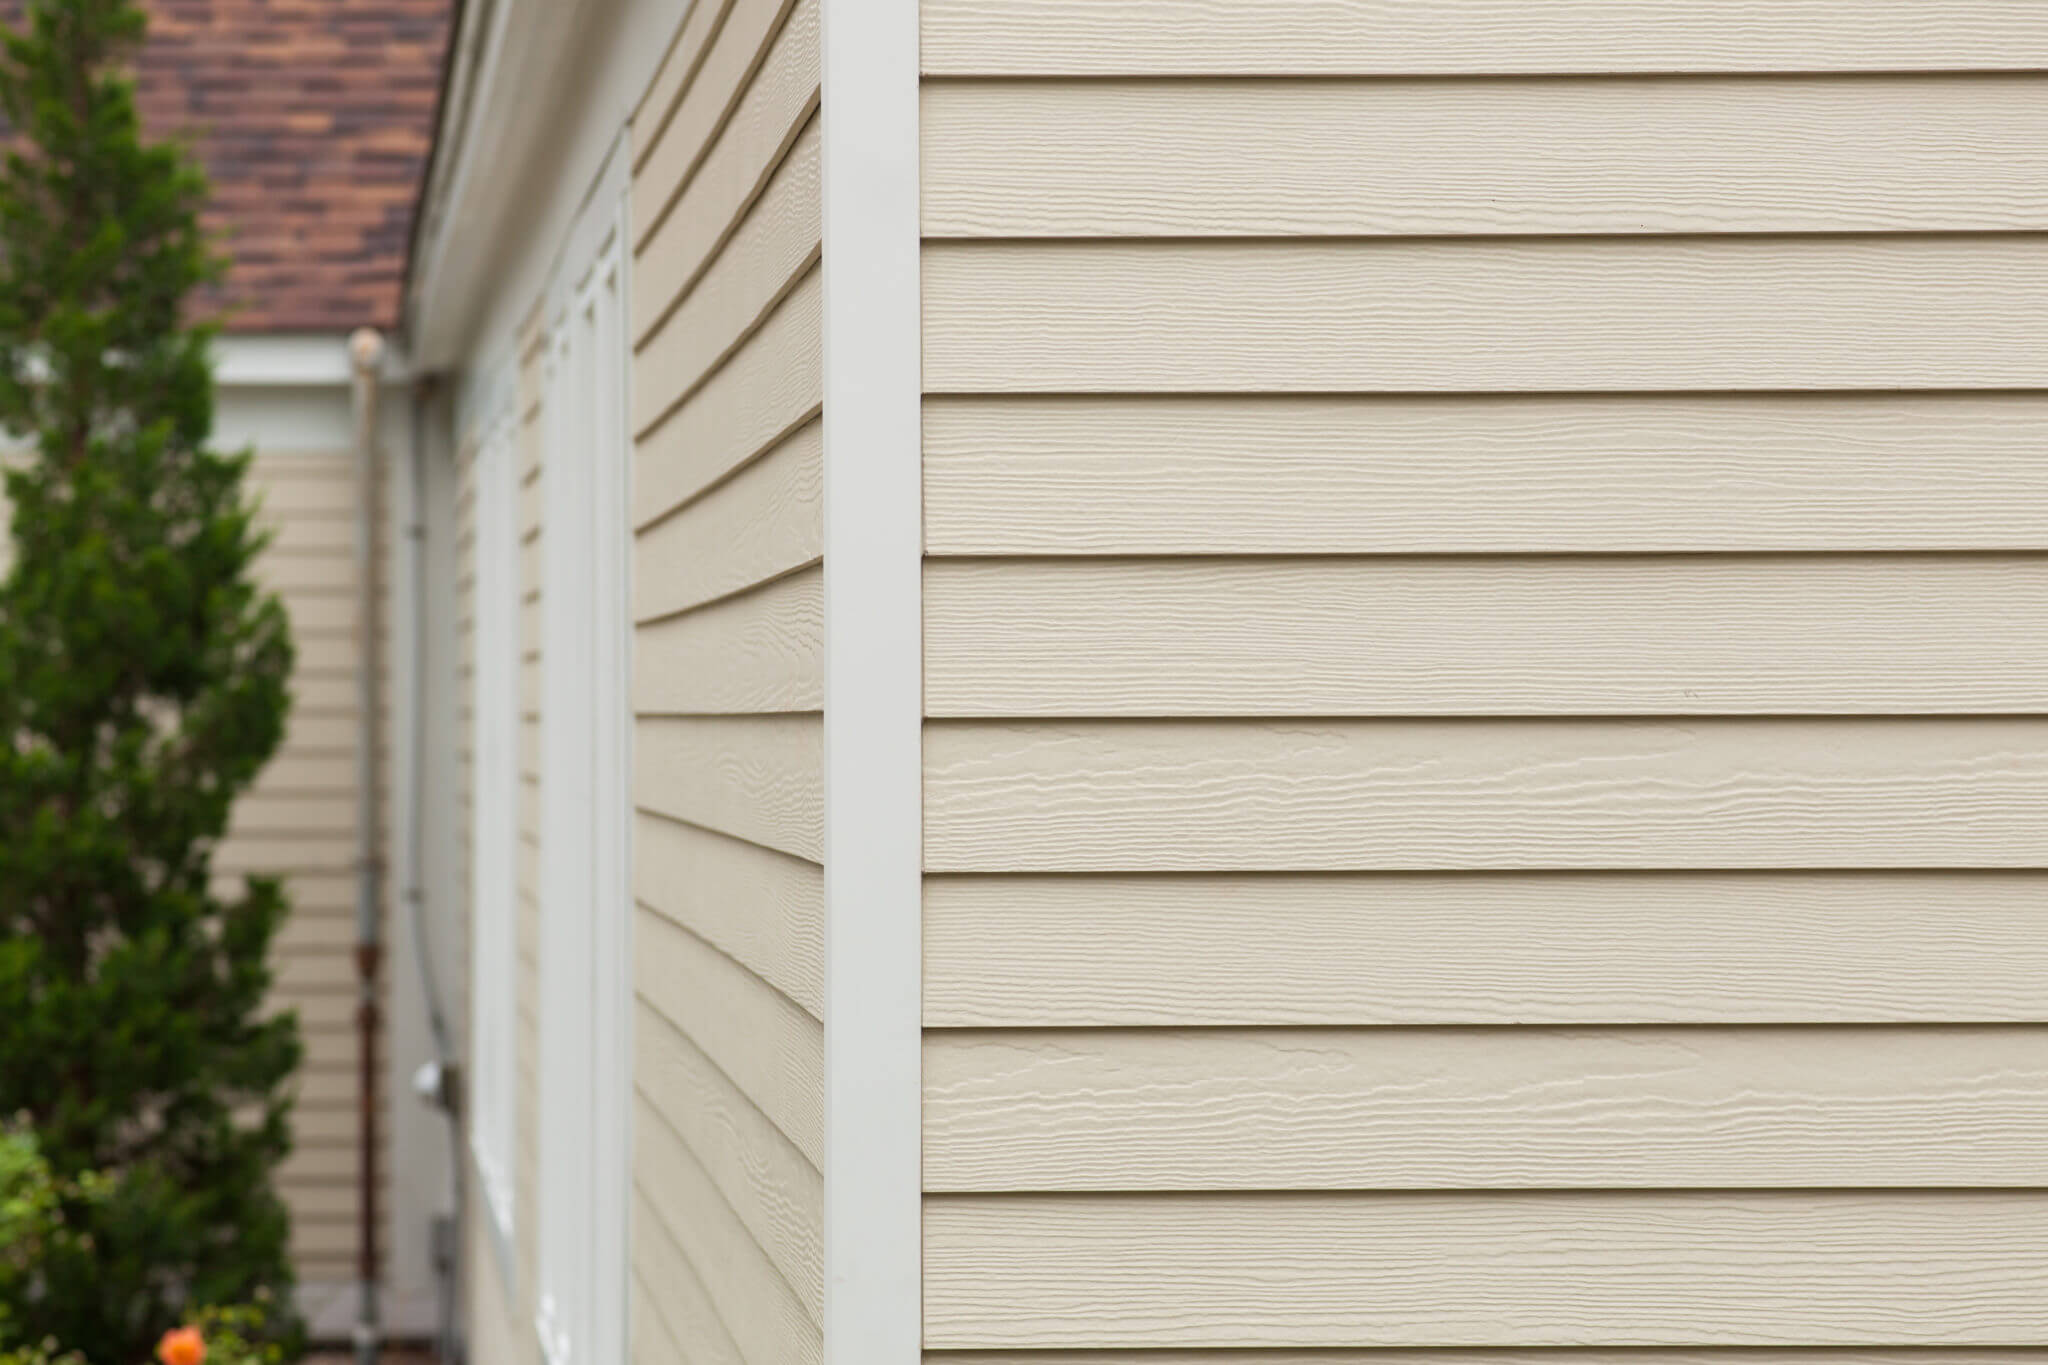 Siding Installation in Middlesex County